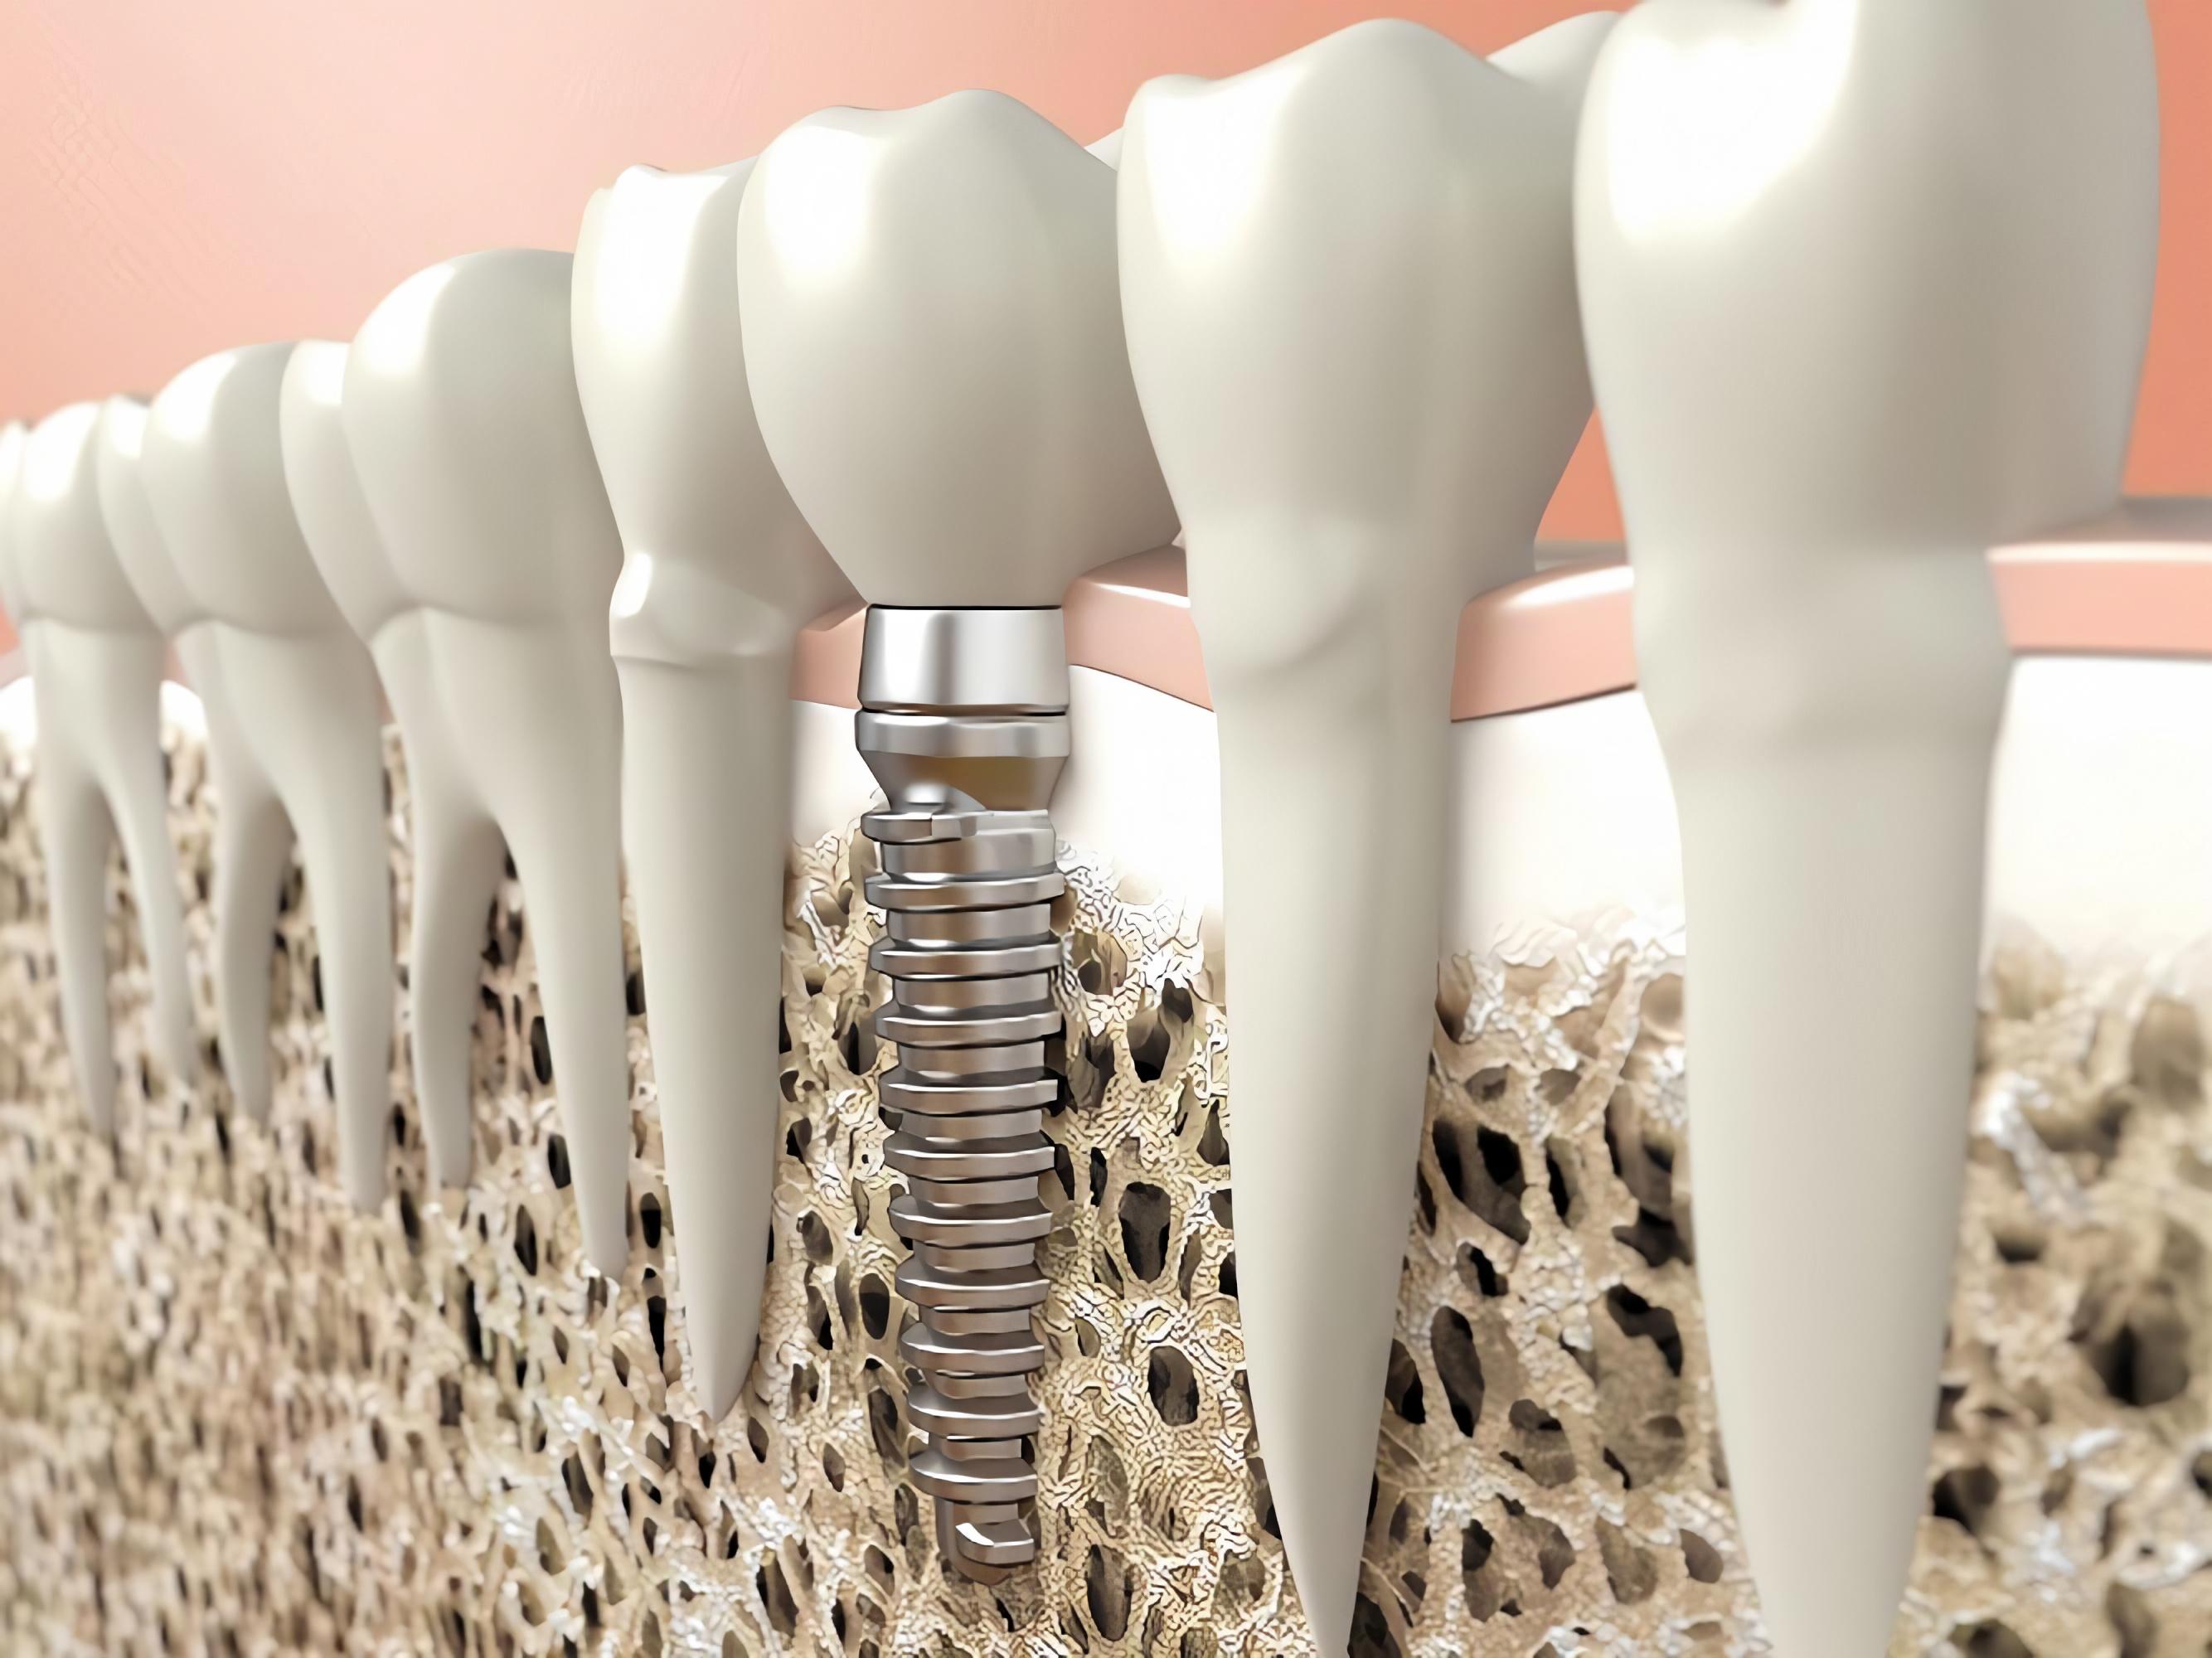 Can you have teeth implants with osteoporosis